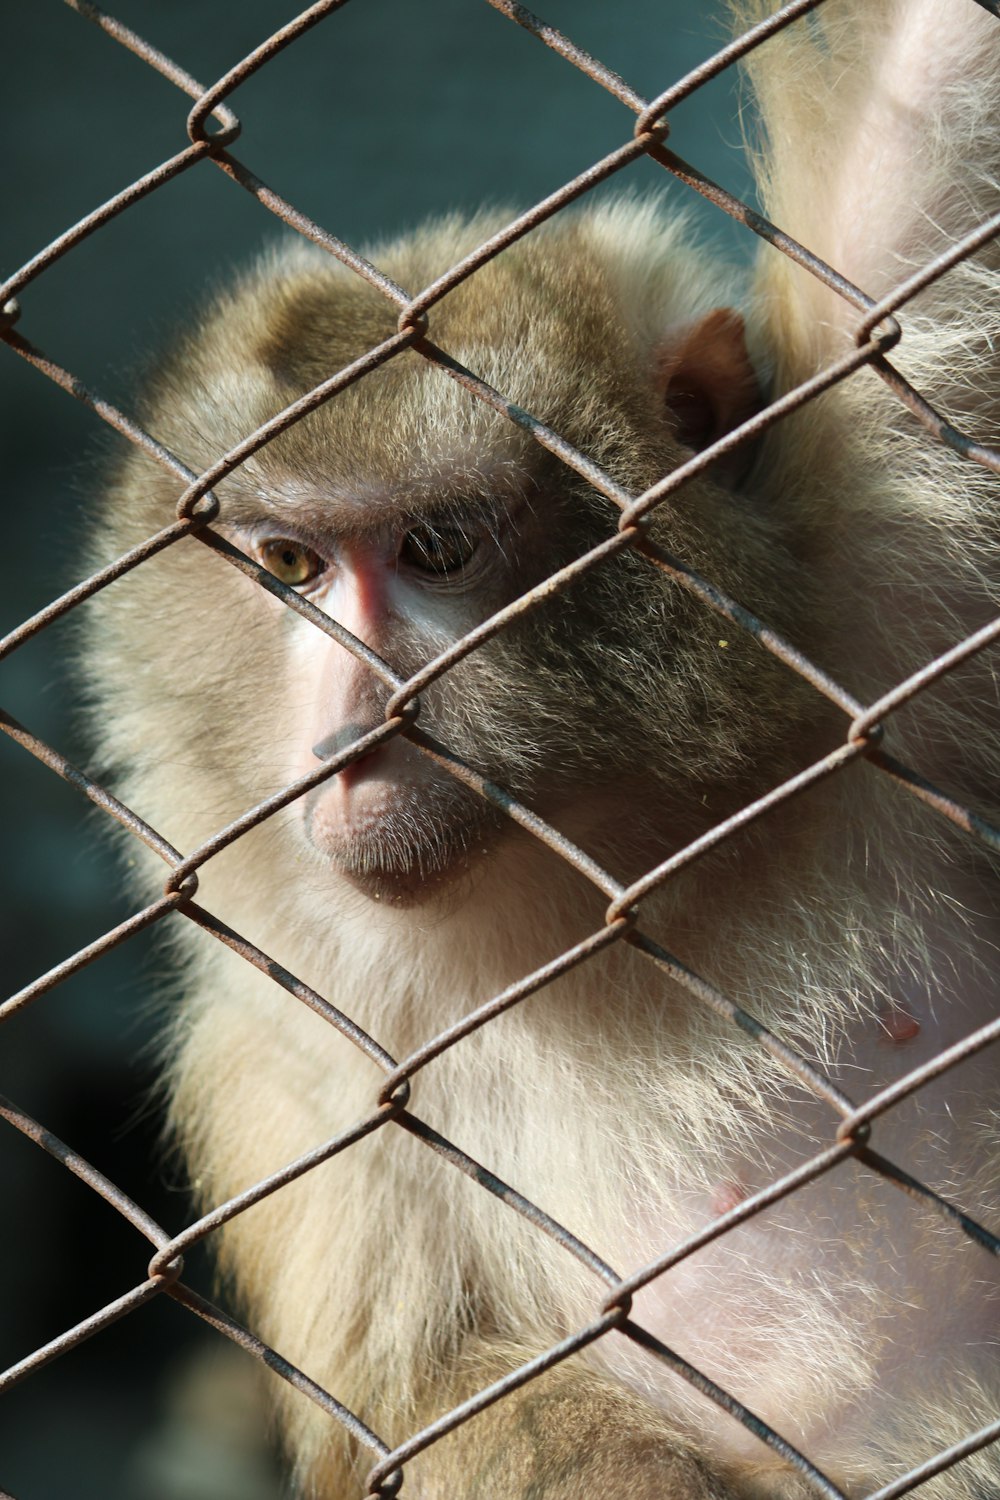 a monkey sitting behind a fence looking at the camera